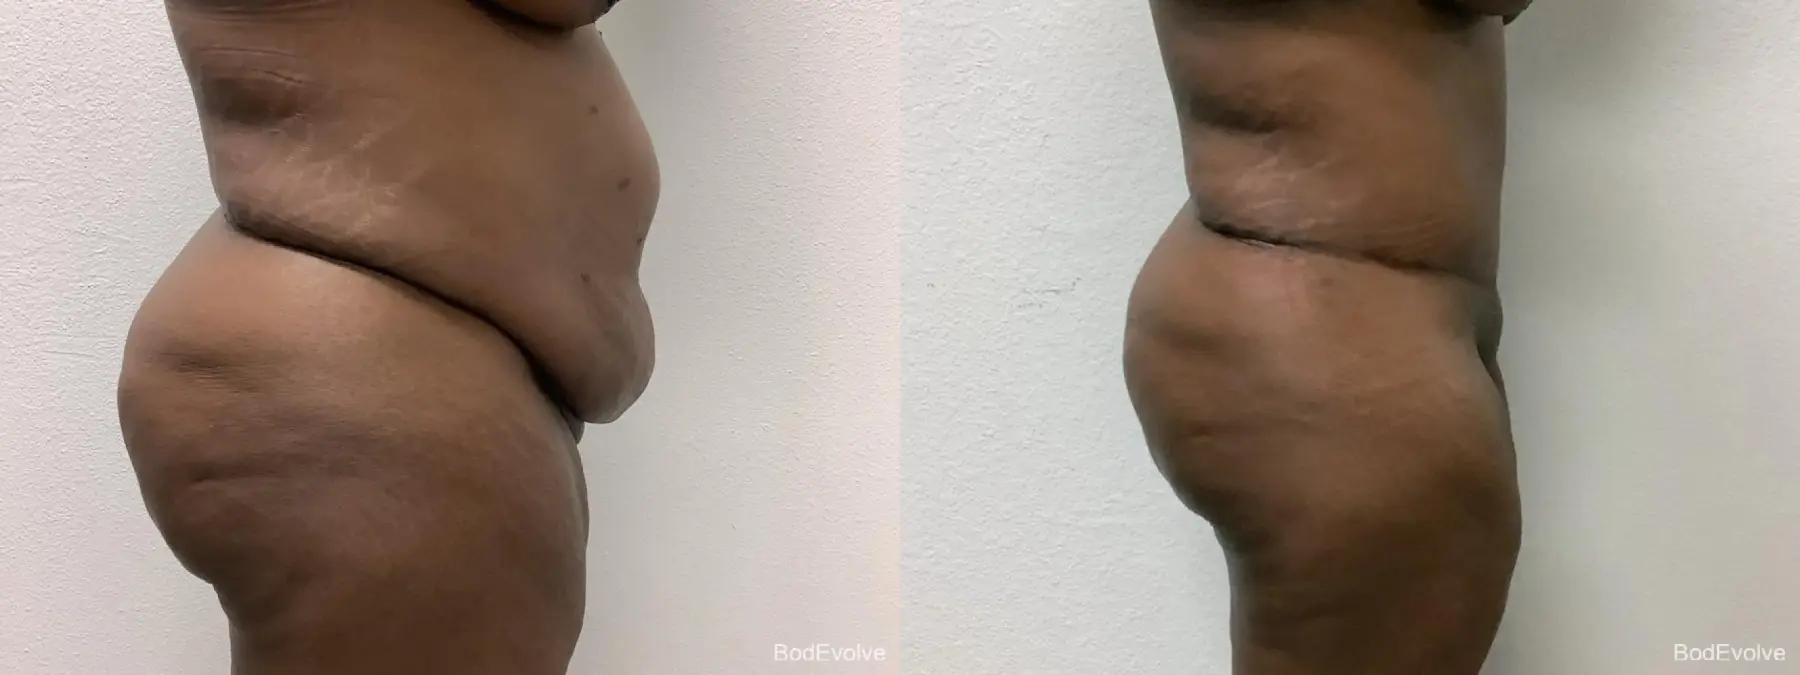 Tummy Tuck: Patient 2 - Before and After 3